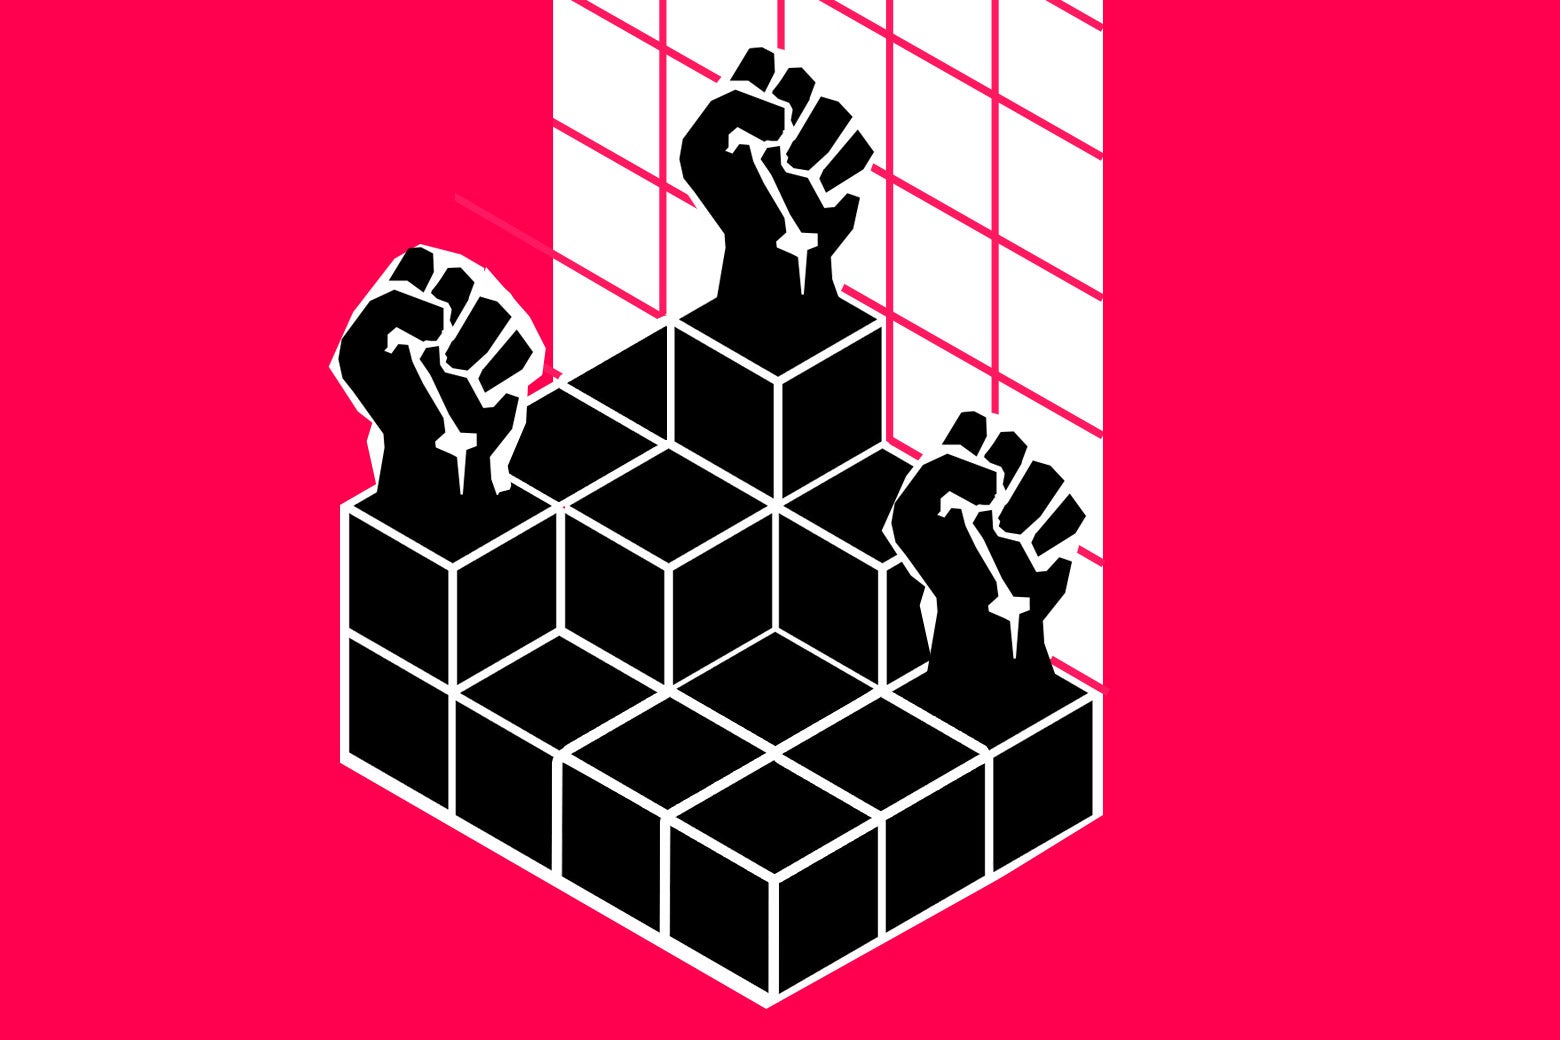 Illustration by Slate.  Illustration of fists raised in solidarity atop a graph of data to combat racism.